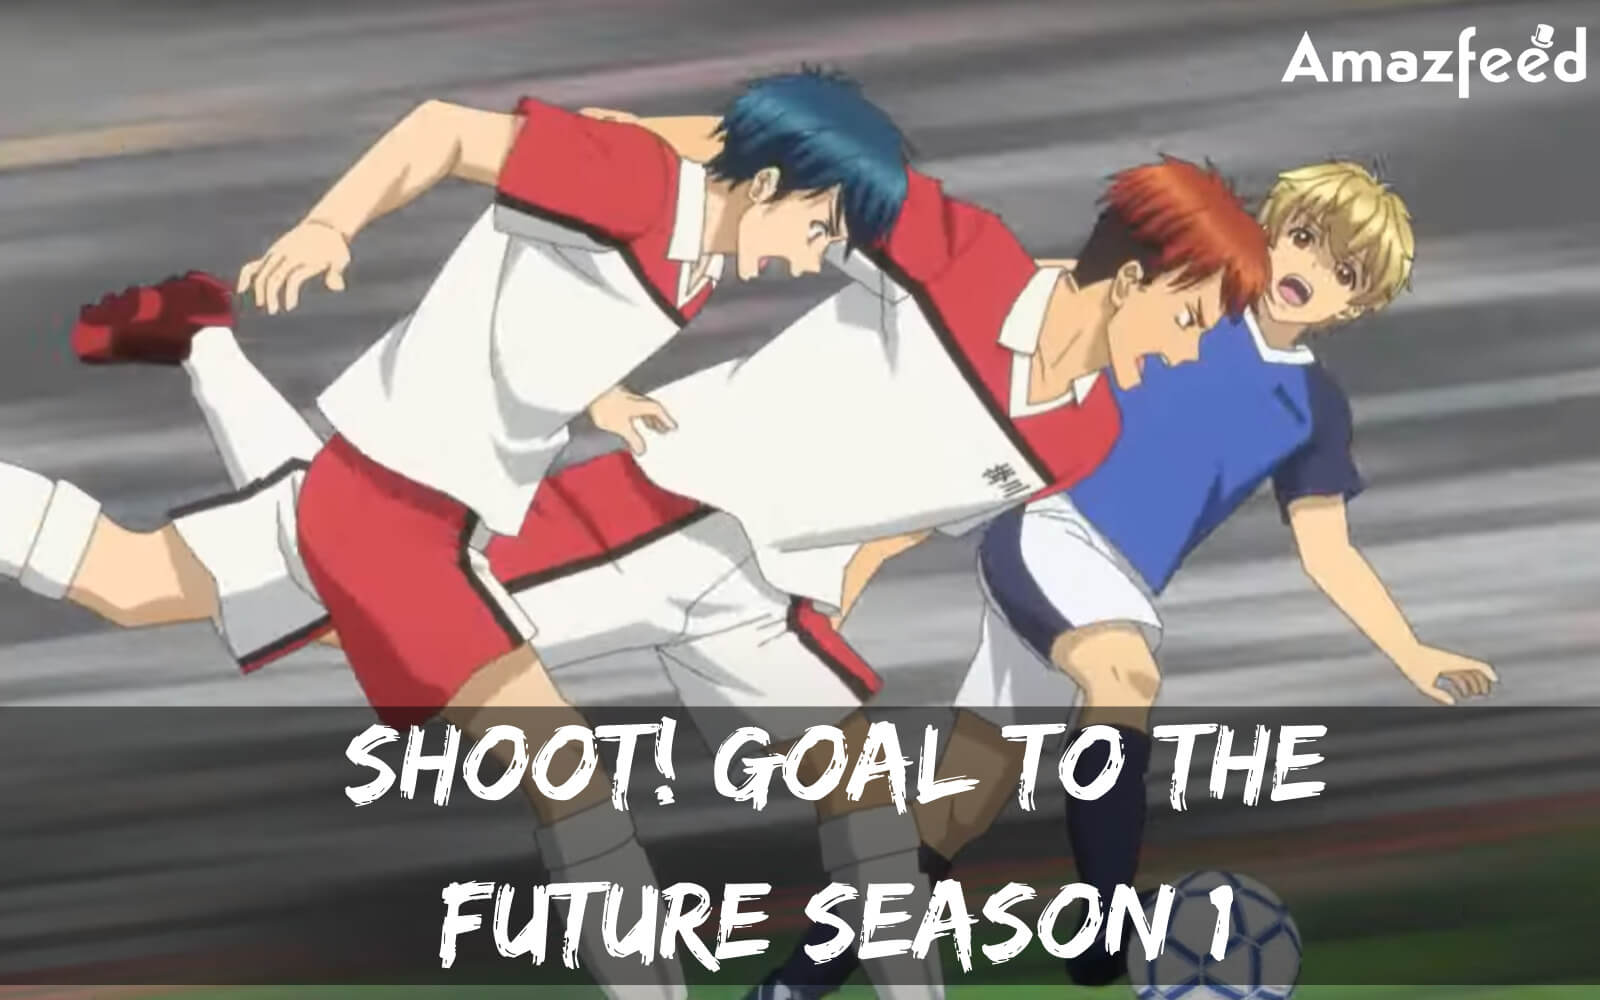 Shoot! Goal to the Future Season 1 Episode 3. Anime Brings Sports as a New  Surprise, Released Date Confirmed? Updates